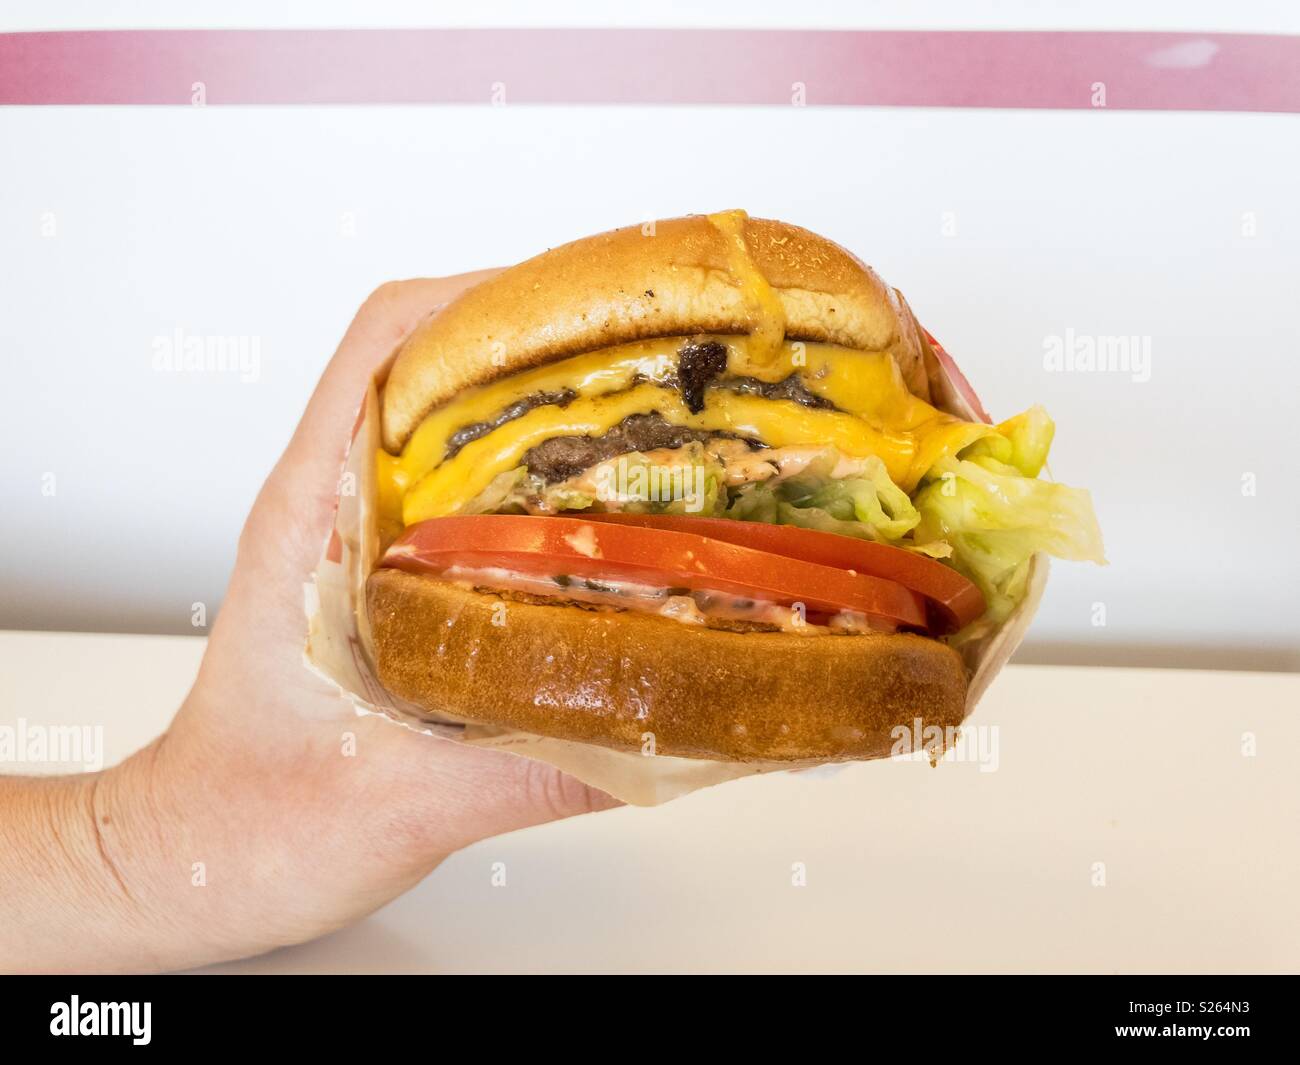 An ‘animal style’ double cheeseburger at In-N-Out in California, USA. Stock Photo